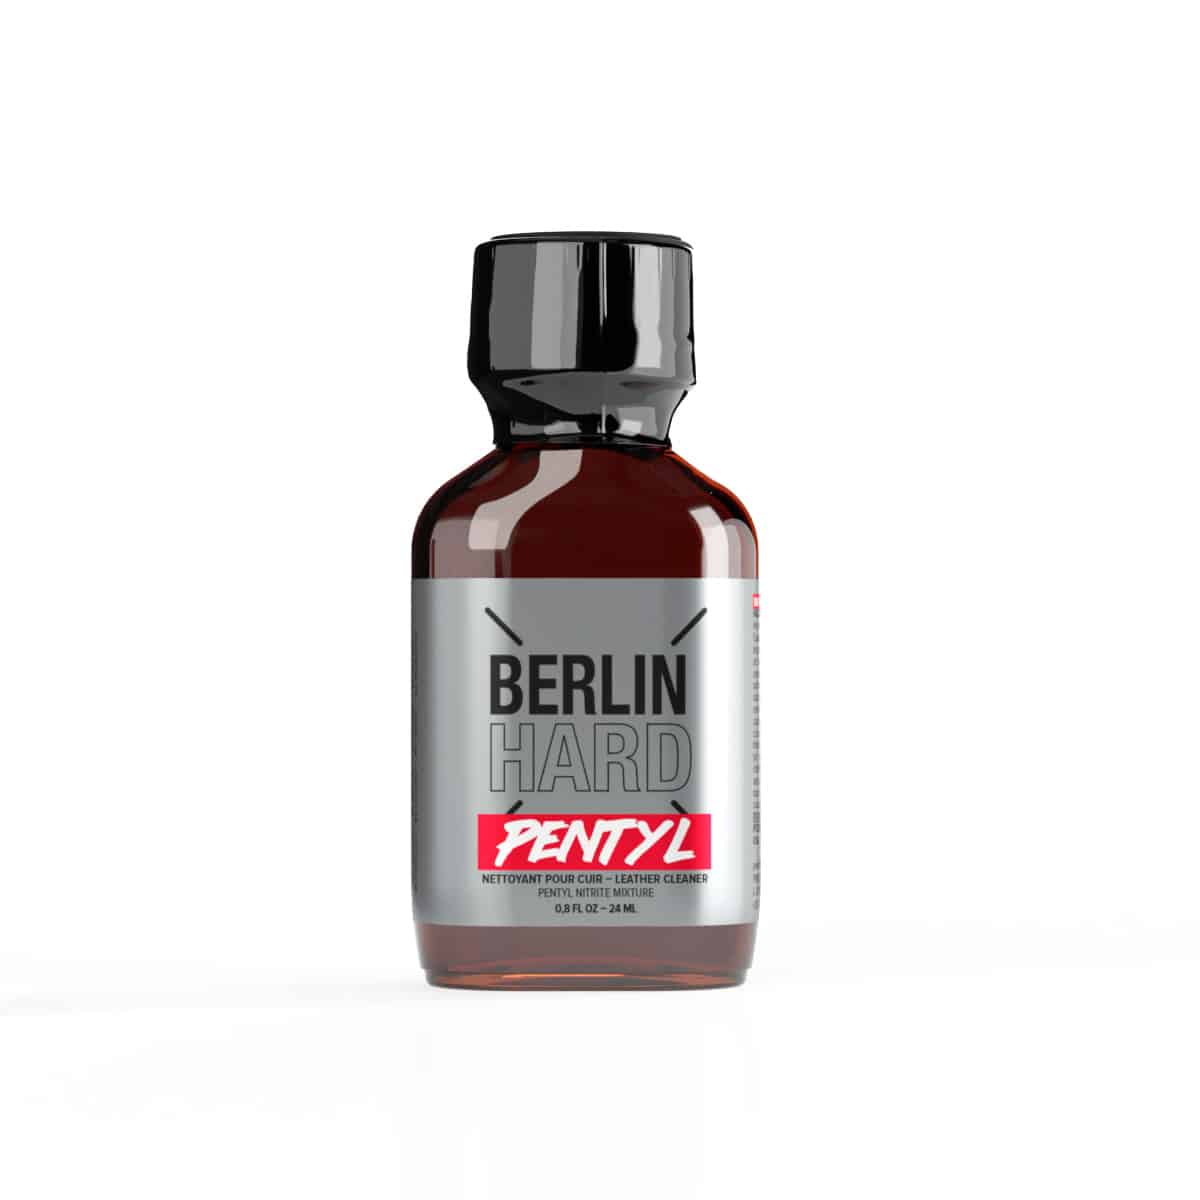 A bottle of Berlin Hard Pentyl 24ml, featuring a strong, bold design, isolated on a white background.